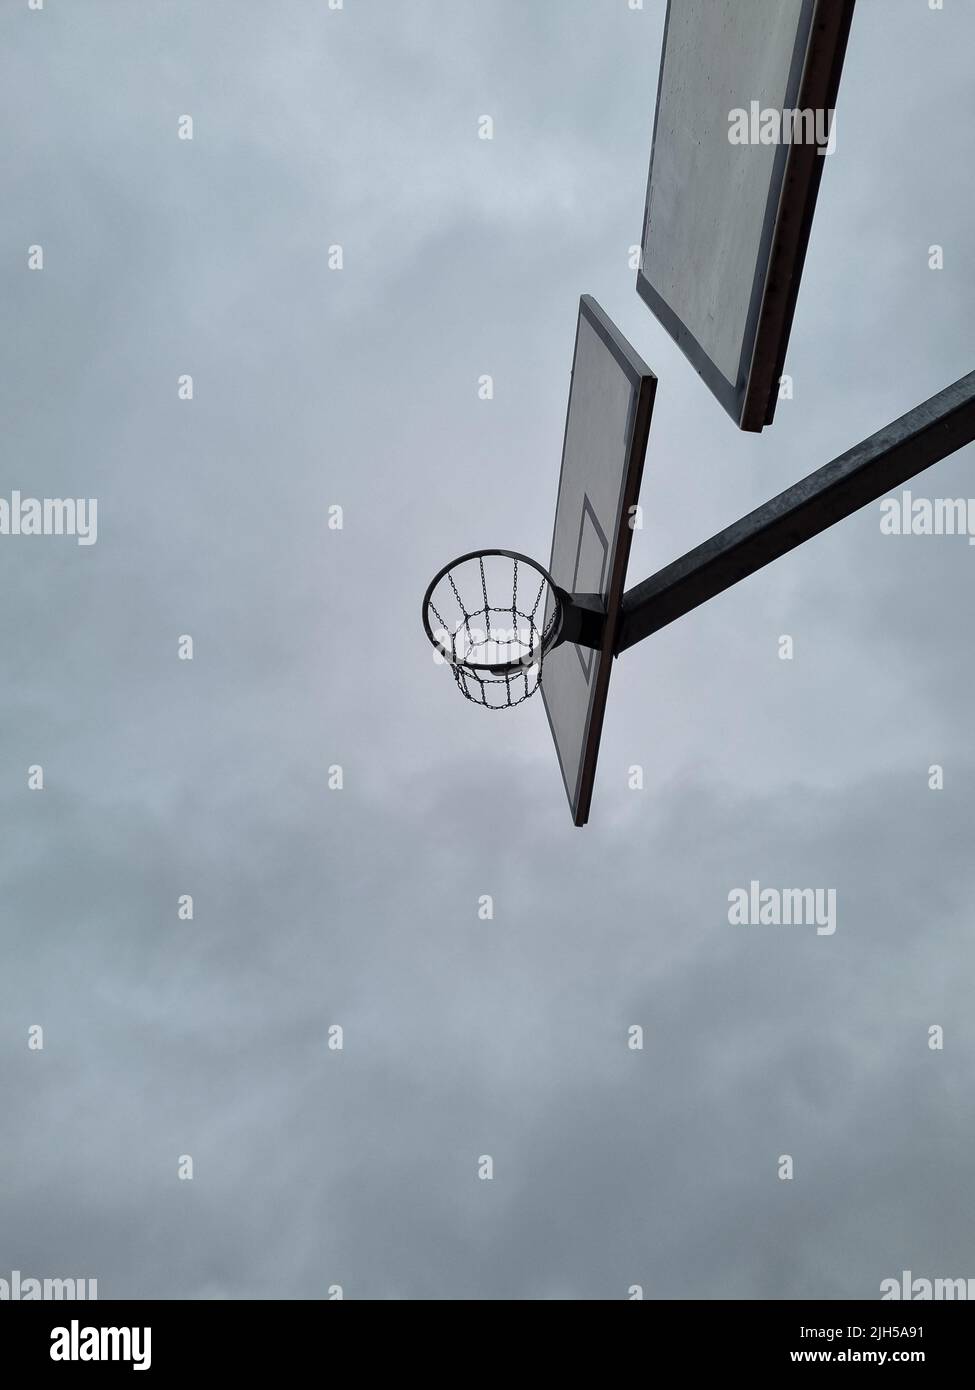 Outdoor basketball rings with chain nets at different levels. Street basketball hoop with a view from below. Street sport during overcast. Stock Photo